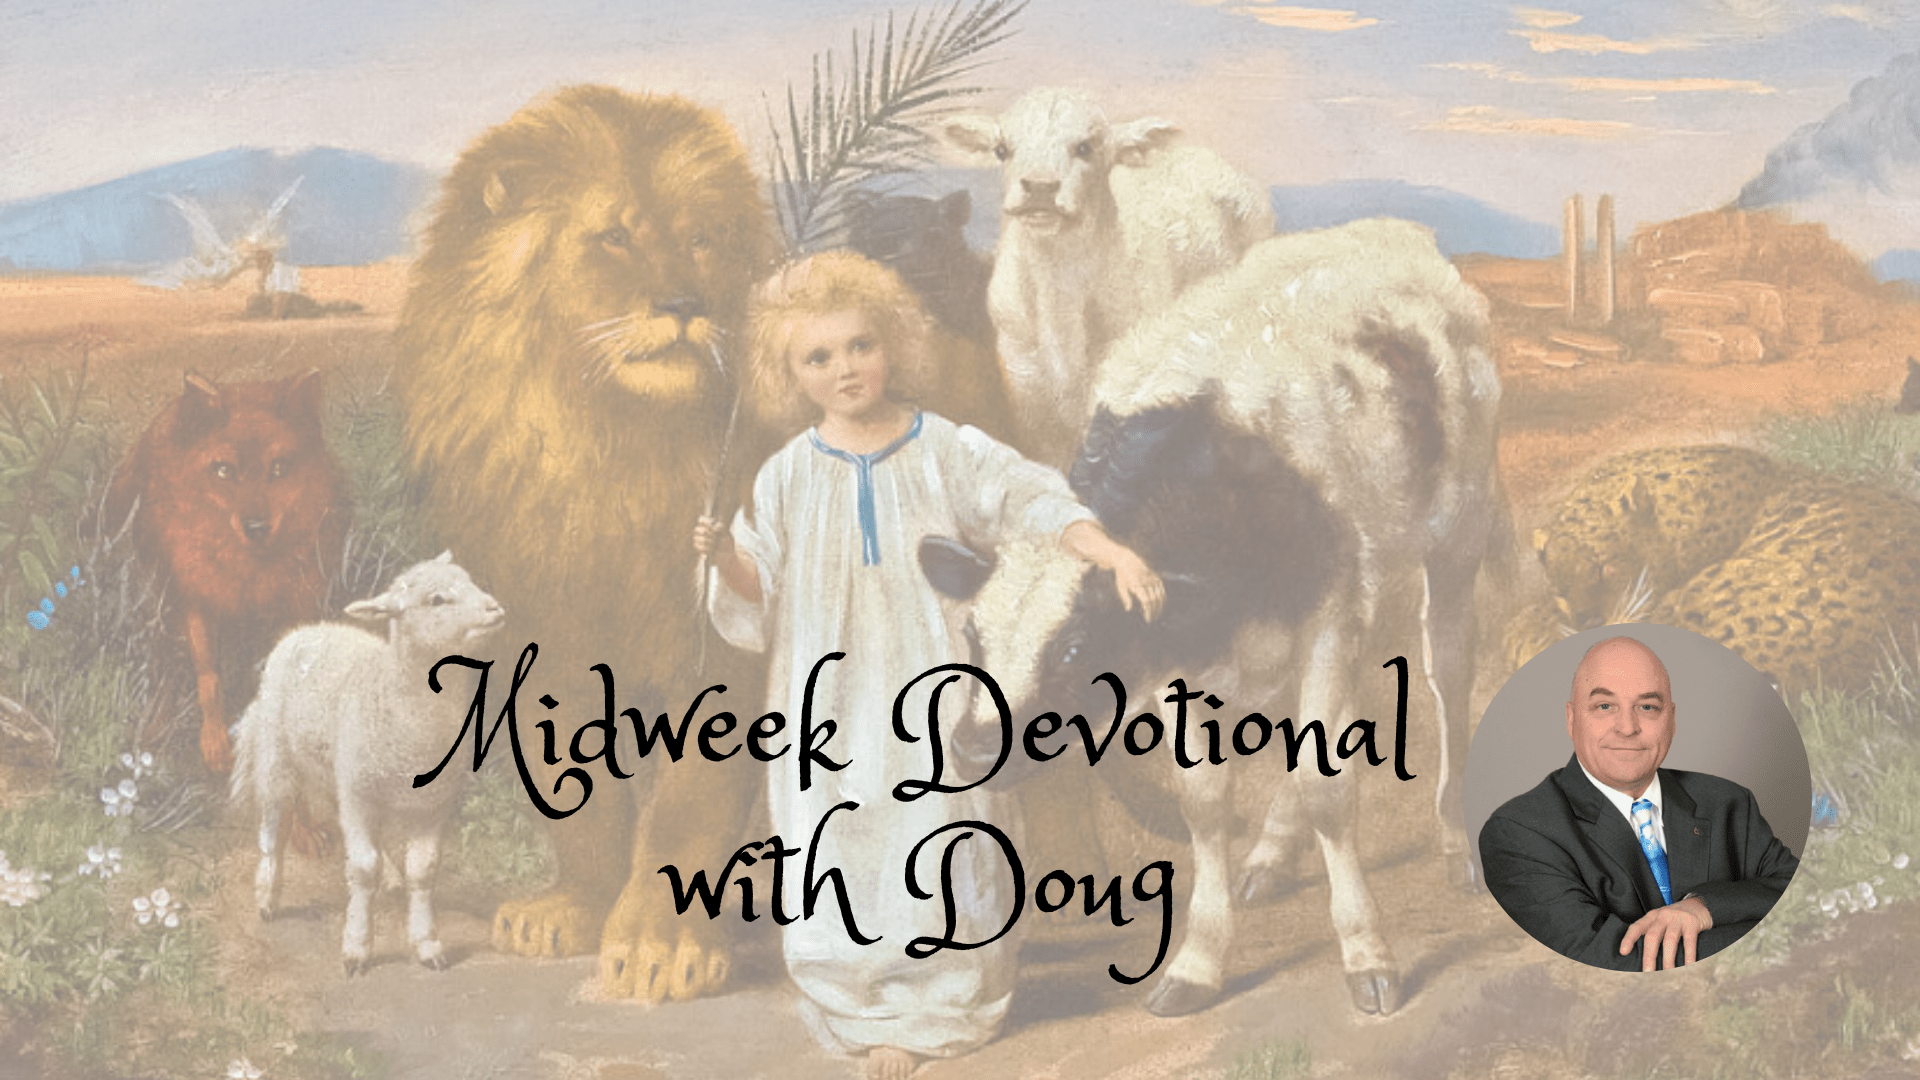 Midweek Devotional with Doug for fourth week of October